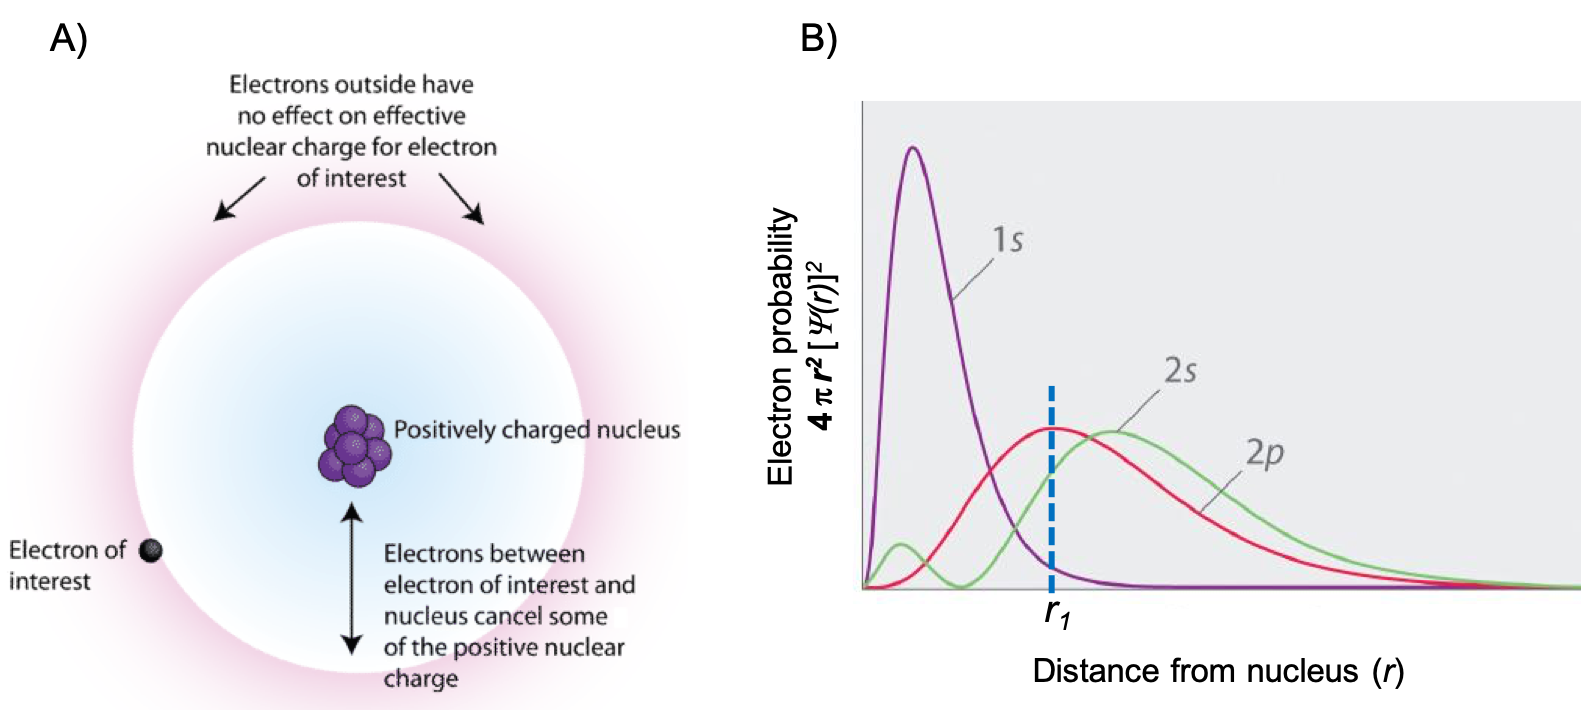 This figure has two parts: the left part is labeled “A” and the right part is labeled “B”. For part A, there is a representation of an atom. There is a blob of purple spheres in the center that is labeled “positively charged nucleus”. This is surrounded by a blue cloud. On the outside of the blue cloud is a red cloud. At the interface of the blue and red clouds is an electron labeled “electron of interest”. There is a double headed arrow in the blue cloud that points between the nucleus and the interface between the blue and red cloud that is labeled “electrons between electron of interest and nucleus cancel some of the positive nuclear charge”. There is an arrow pointing to the red cloud that states “Electrons outside have no effect on effective nuclear charge for electron of interest. In part B, there is a plot of electron probability versus distance from the nucleus (r). Electron probability is defined as 4 multiplied by pi multiplied by the radius squared multiplied by the wave function as a function of r squared. There are 3 curves plotted. A purple curve has one tall peak and is labeled “1 s”. A green trace has a small peak at about the same x value as the purple peak, but much smaller. Then it has a taller peak at a larger x value. Between the two peaks, the intensity dips back to zero. This curve is labeled “2 s”. The third trace is red and has a single peak at an x distance between the peak for the purple graph and the taller peak for the green graph. This trace is labeled “2 p”. A dotted line is drawn upward from x equals r subscript 1 on the x axis to the peak of the red curve.